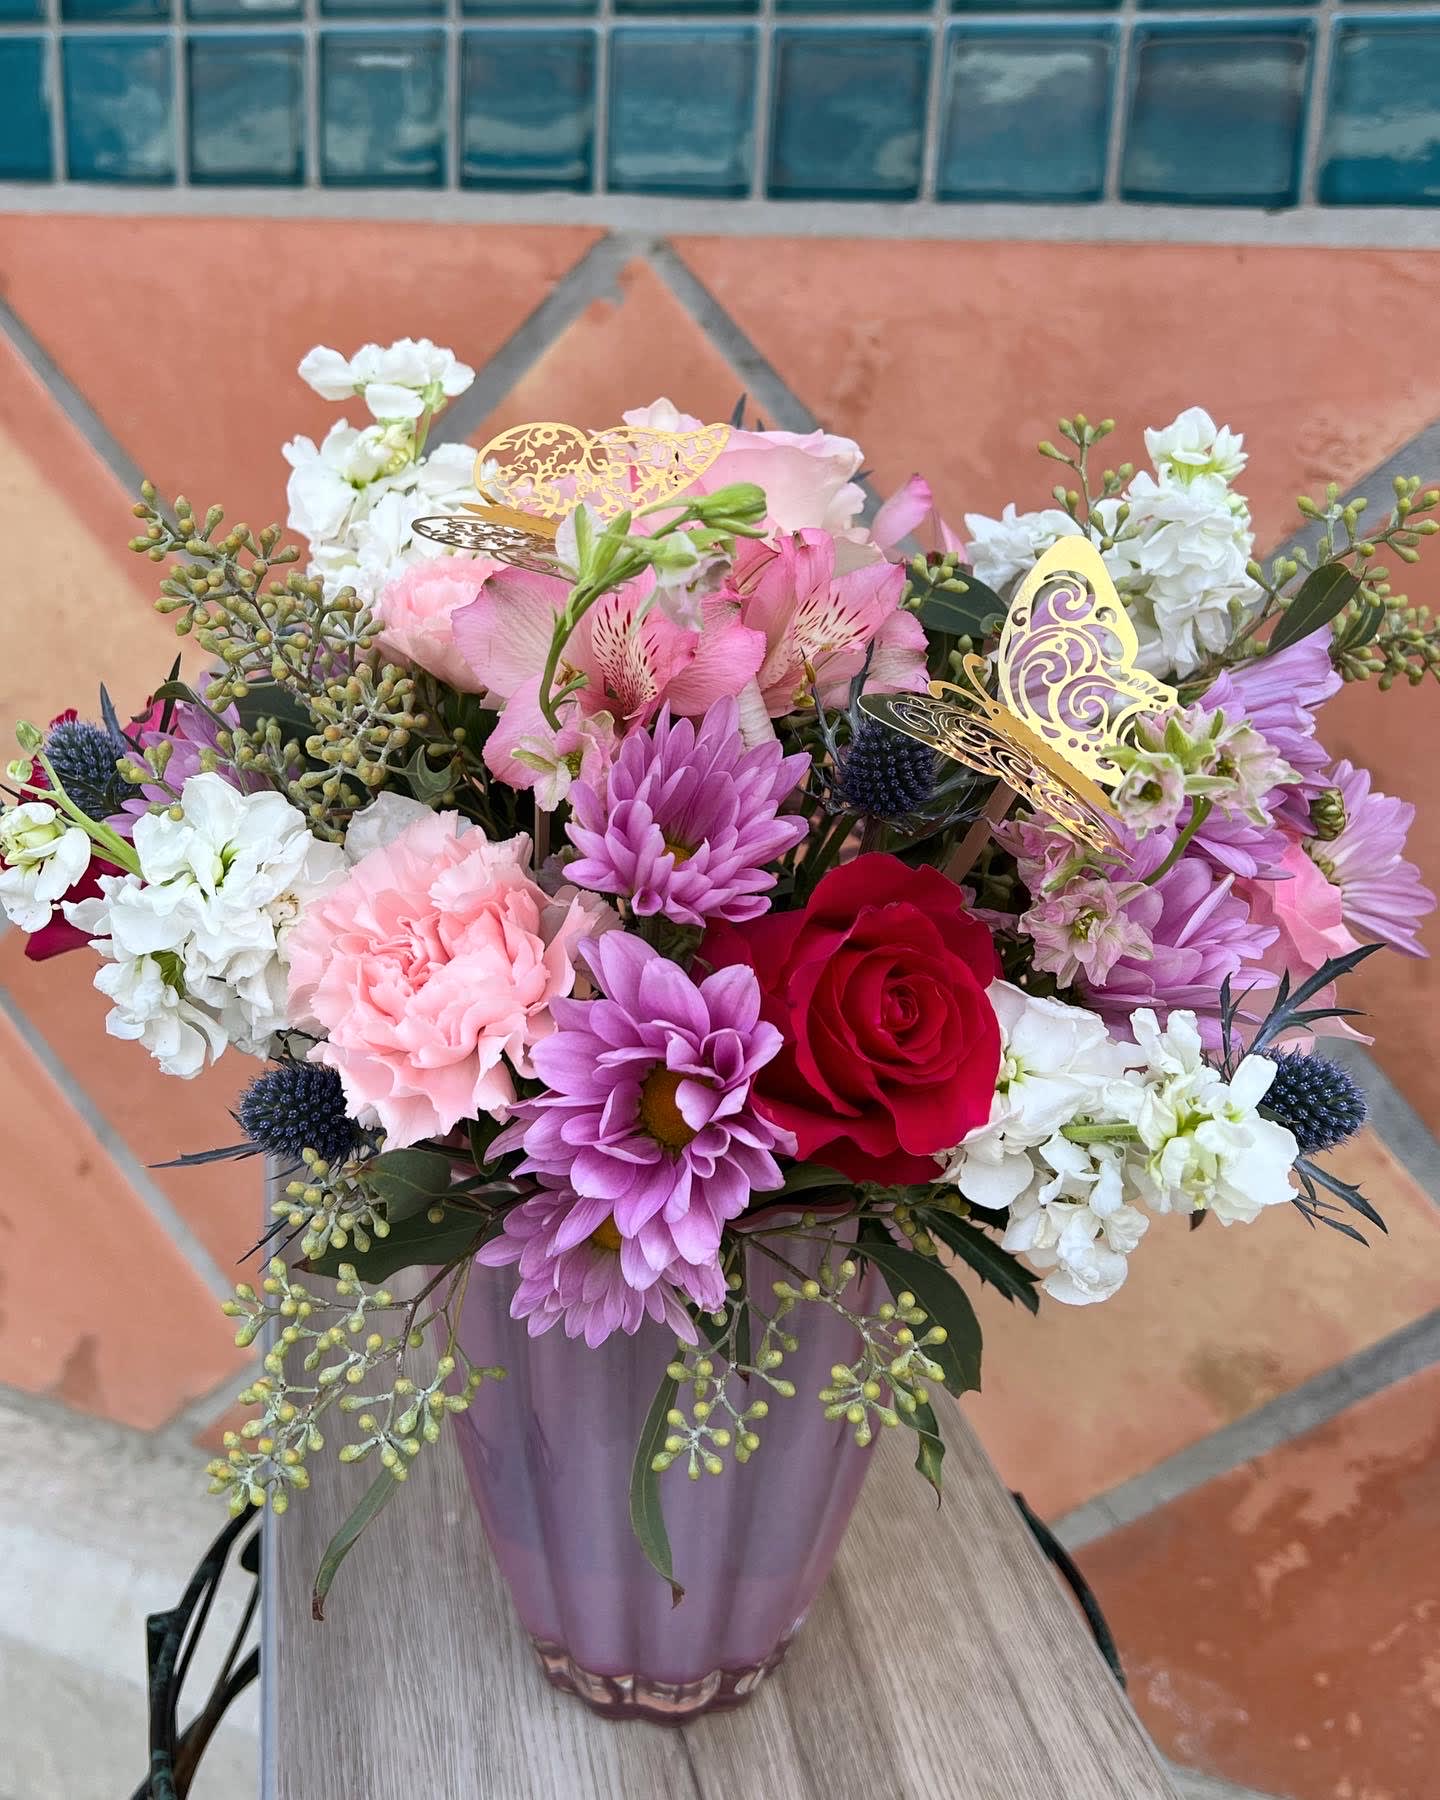 Playful pastel bouquet - lavender, pink, and white flowers are artistically arranged inside an on-trend lavender or pink glass vase.